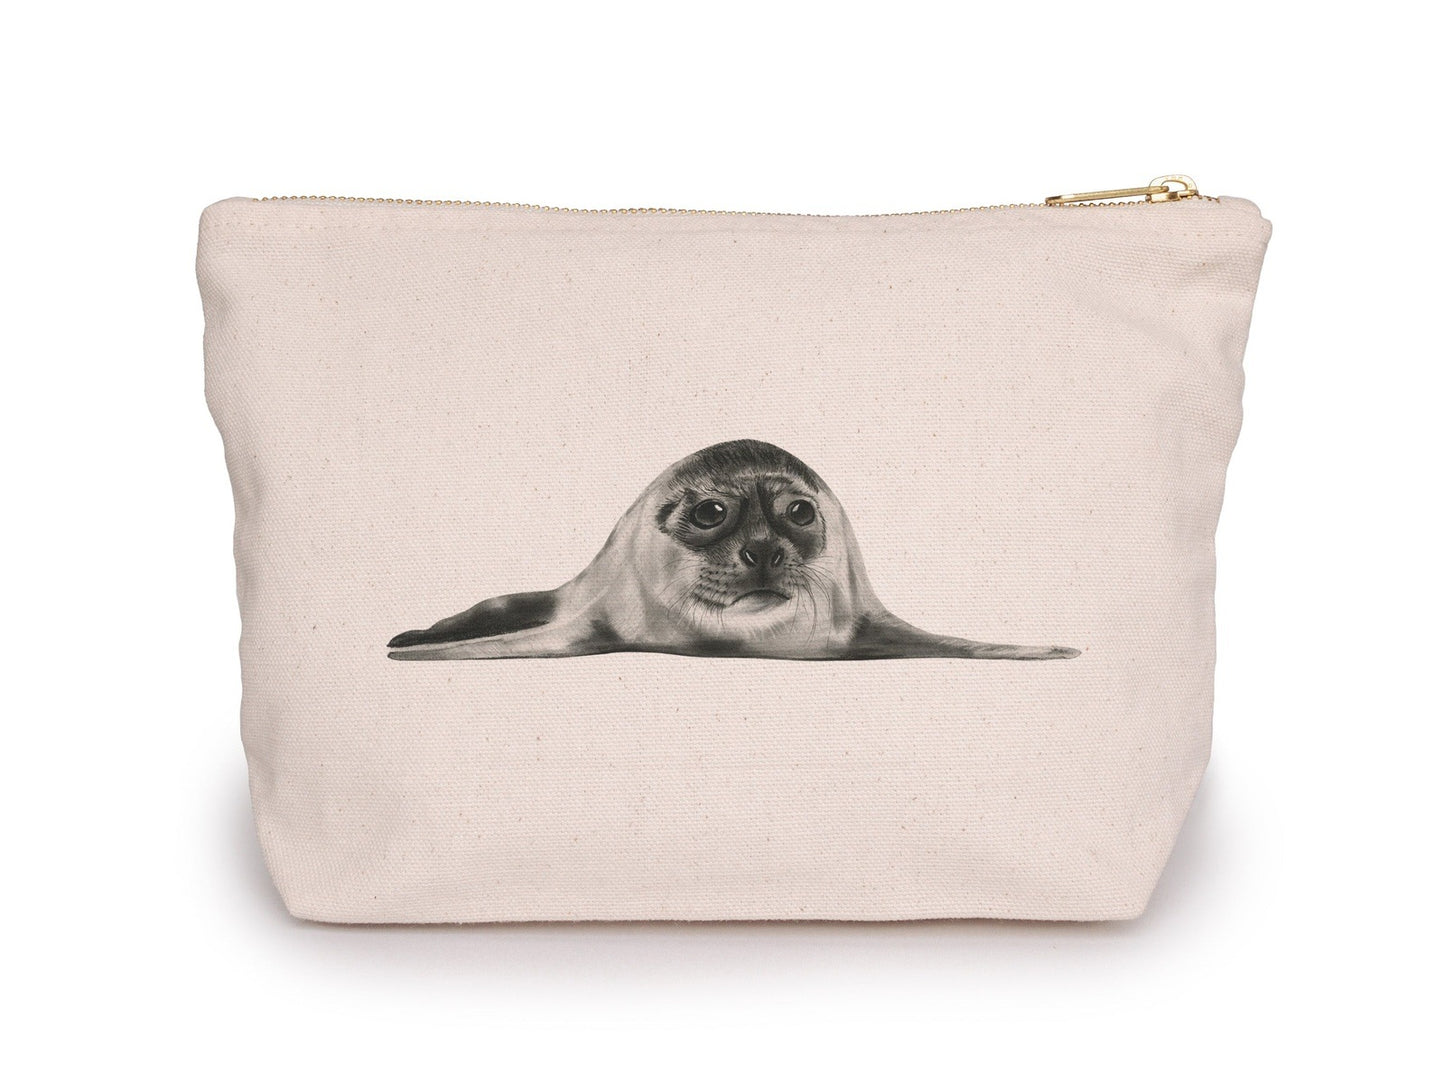 Seal Pouch Bag From Libra Fine Arts